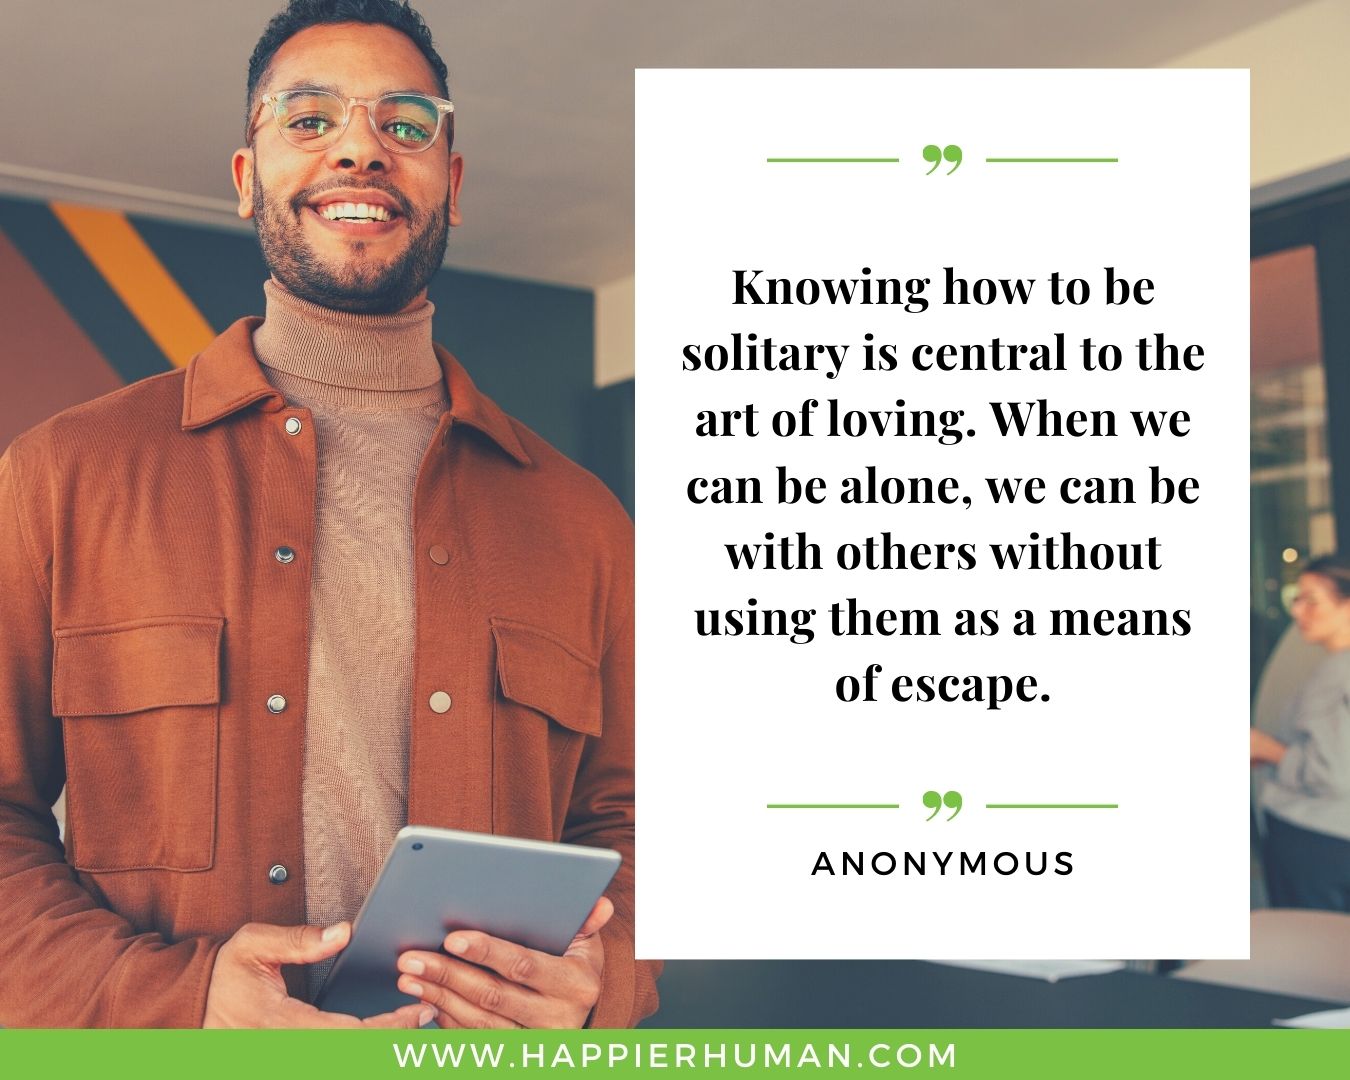 Loneliness Quotes - “Knowing how to be solitary is central to the art of loving. When we can be alone, we can be with others without using them as a means of escape.”– Anonymous